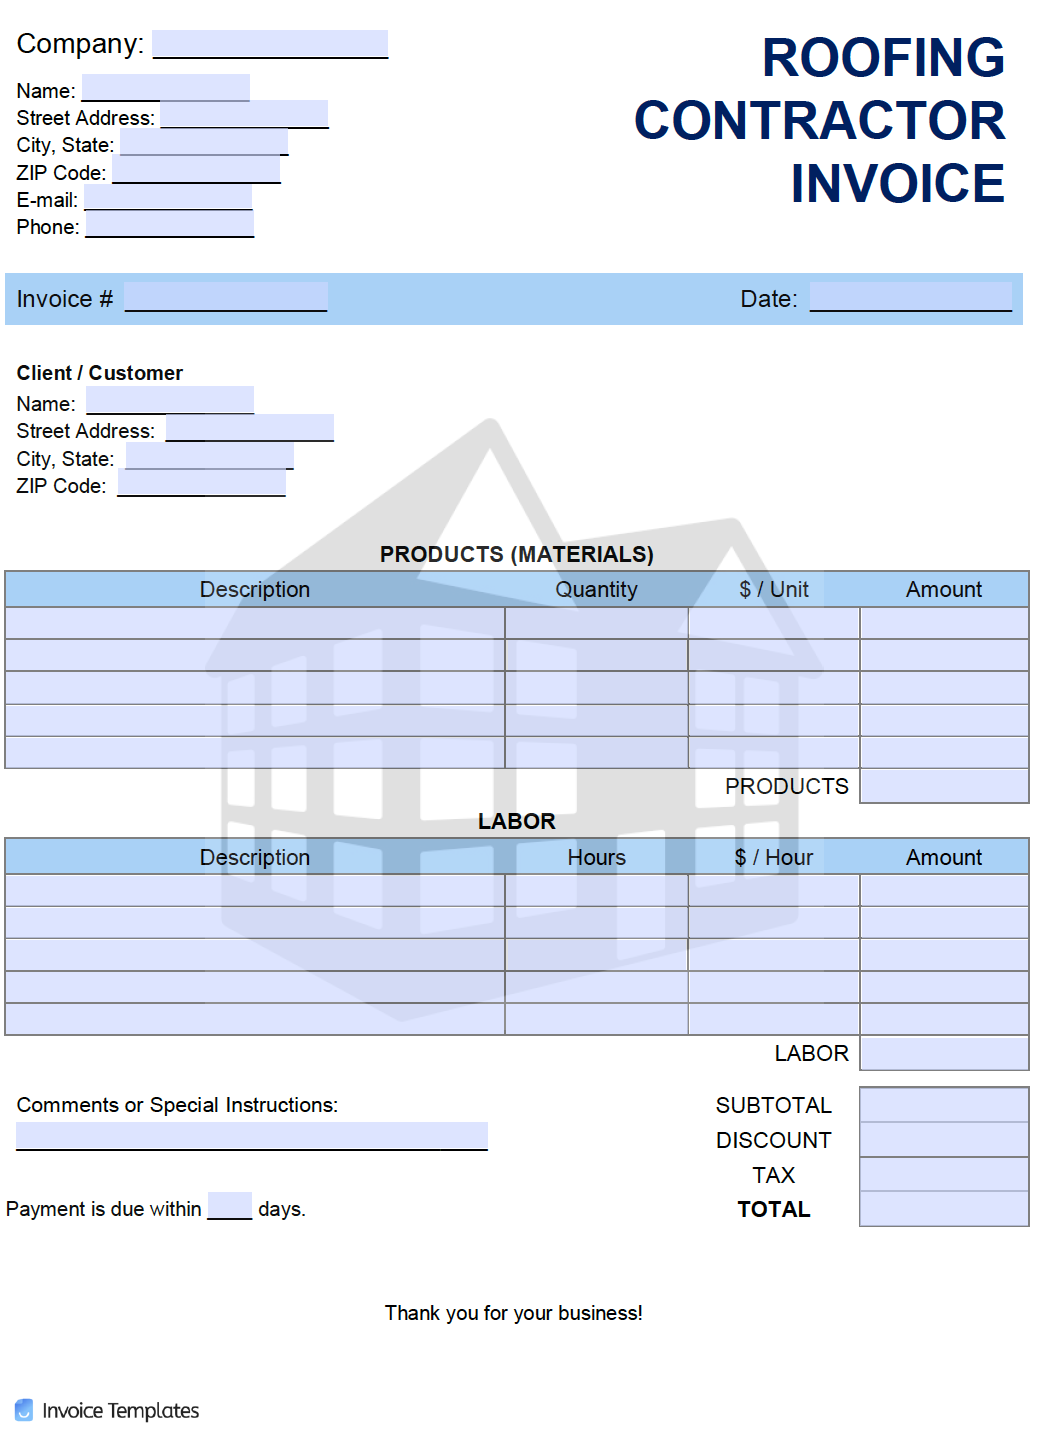 Free Roofing Contractor Invoice Template  PDF  WORD  EXCEL Regarding Roofing Invoice Template Free